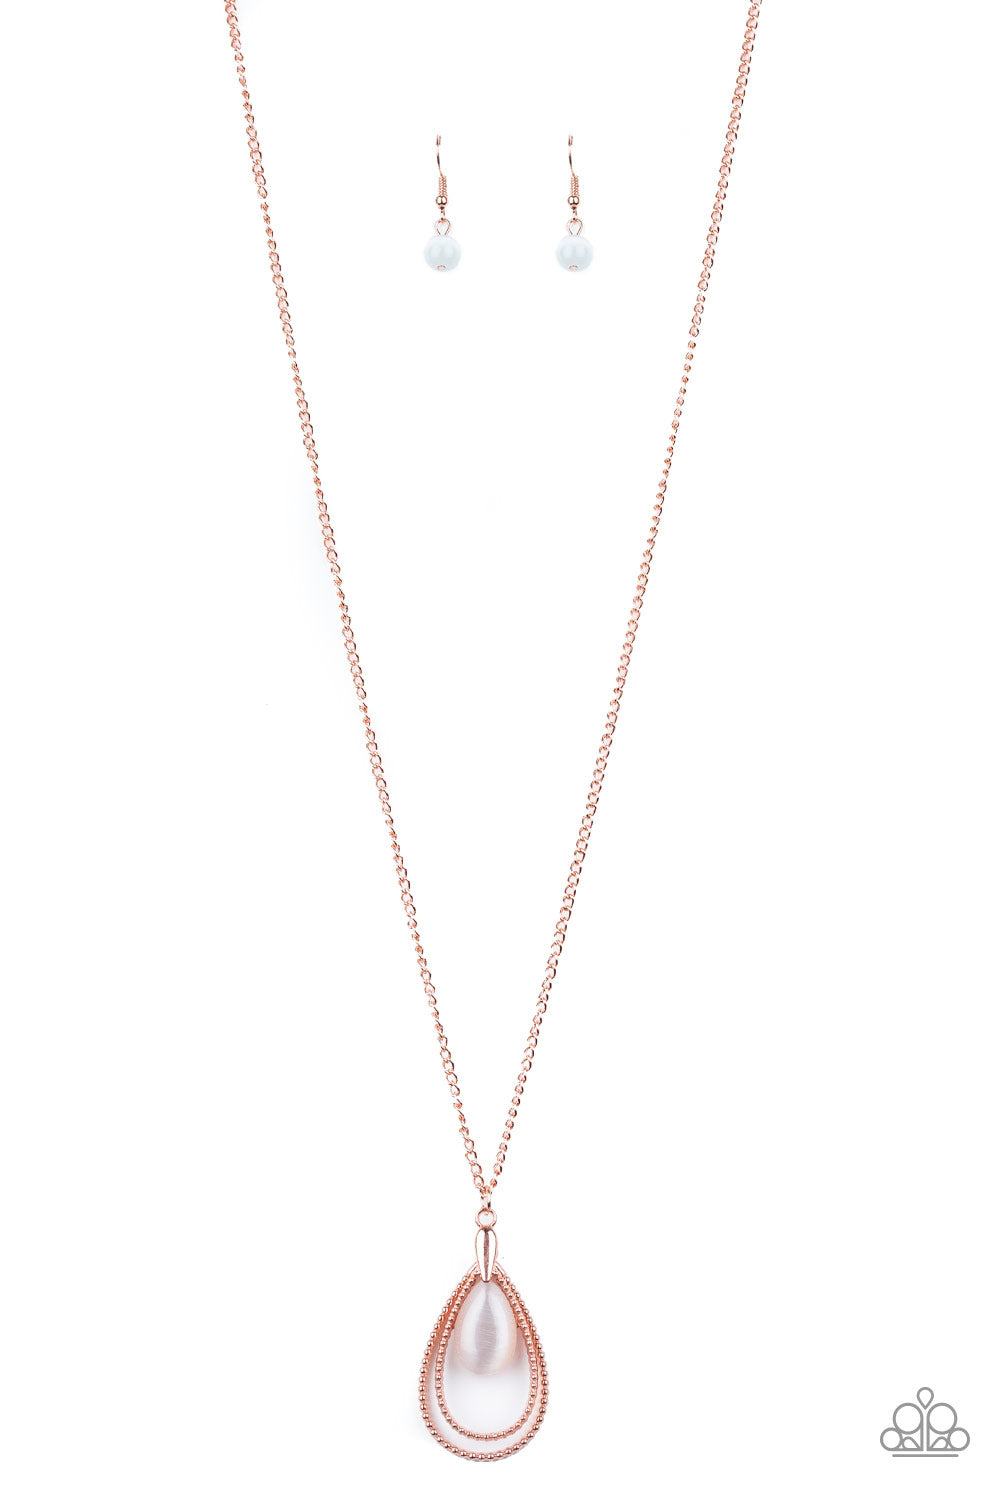 Teardrop Tranquility - Shiny Copper necklace